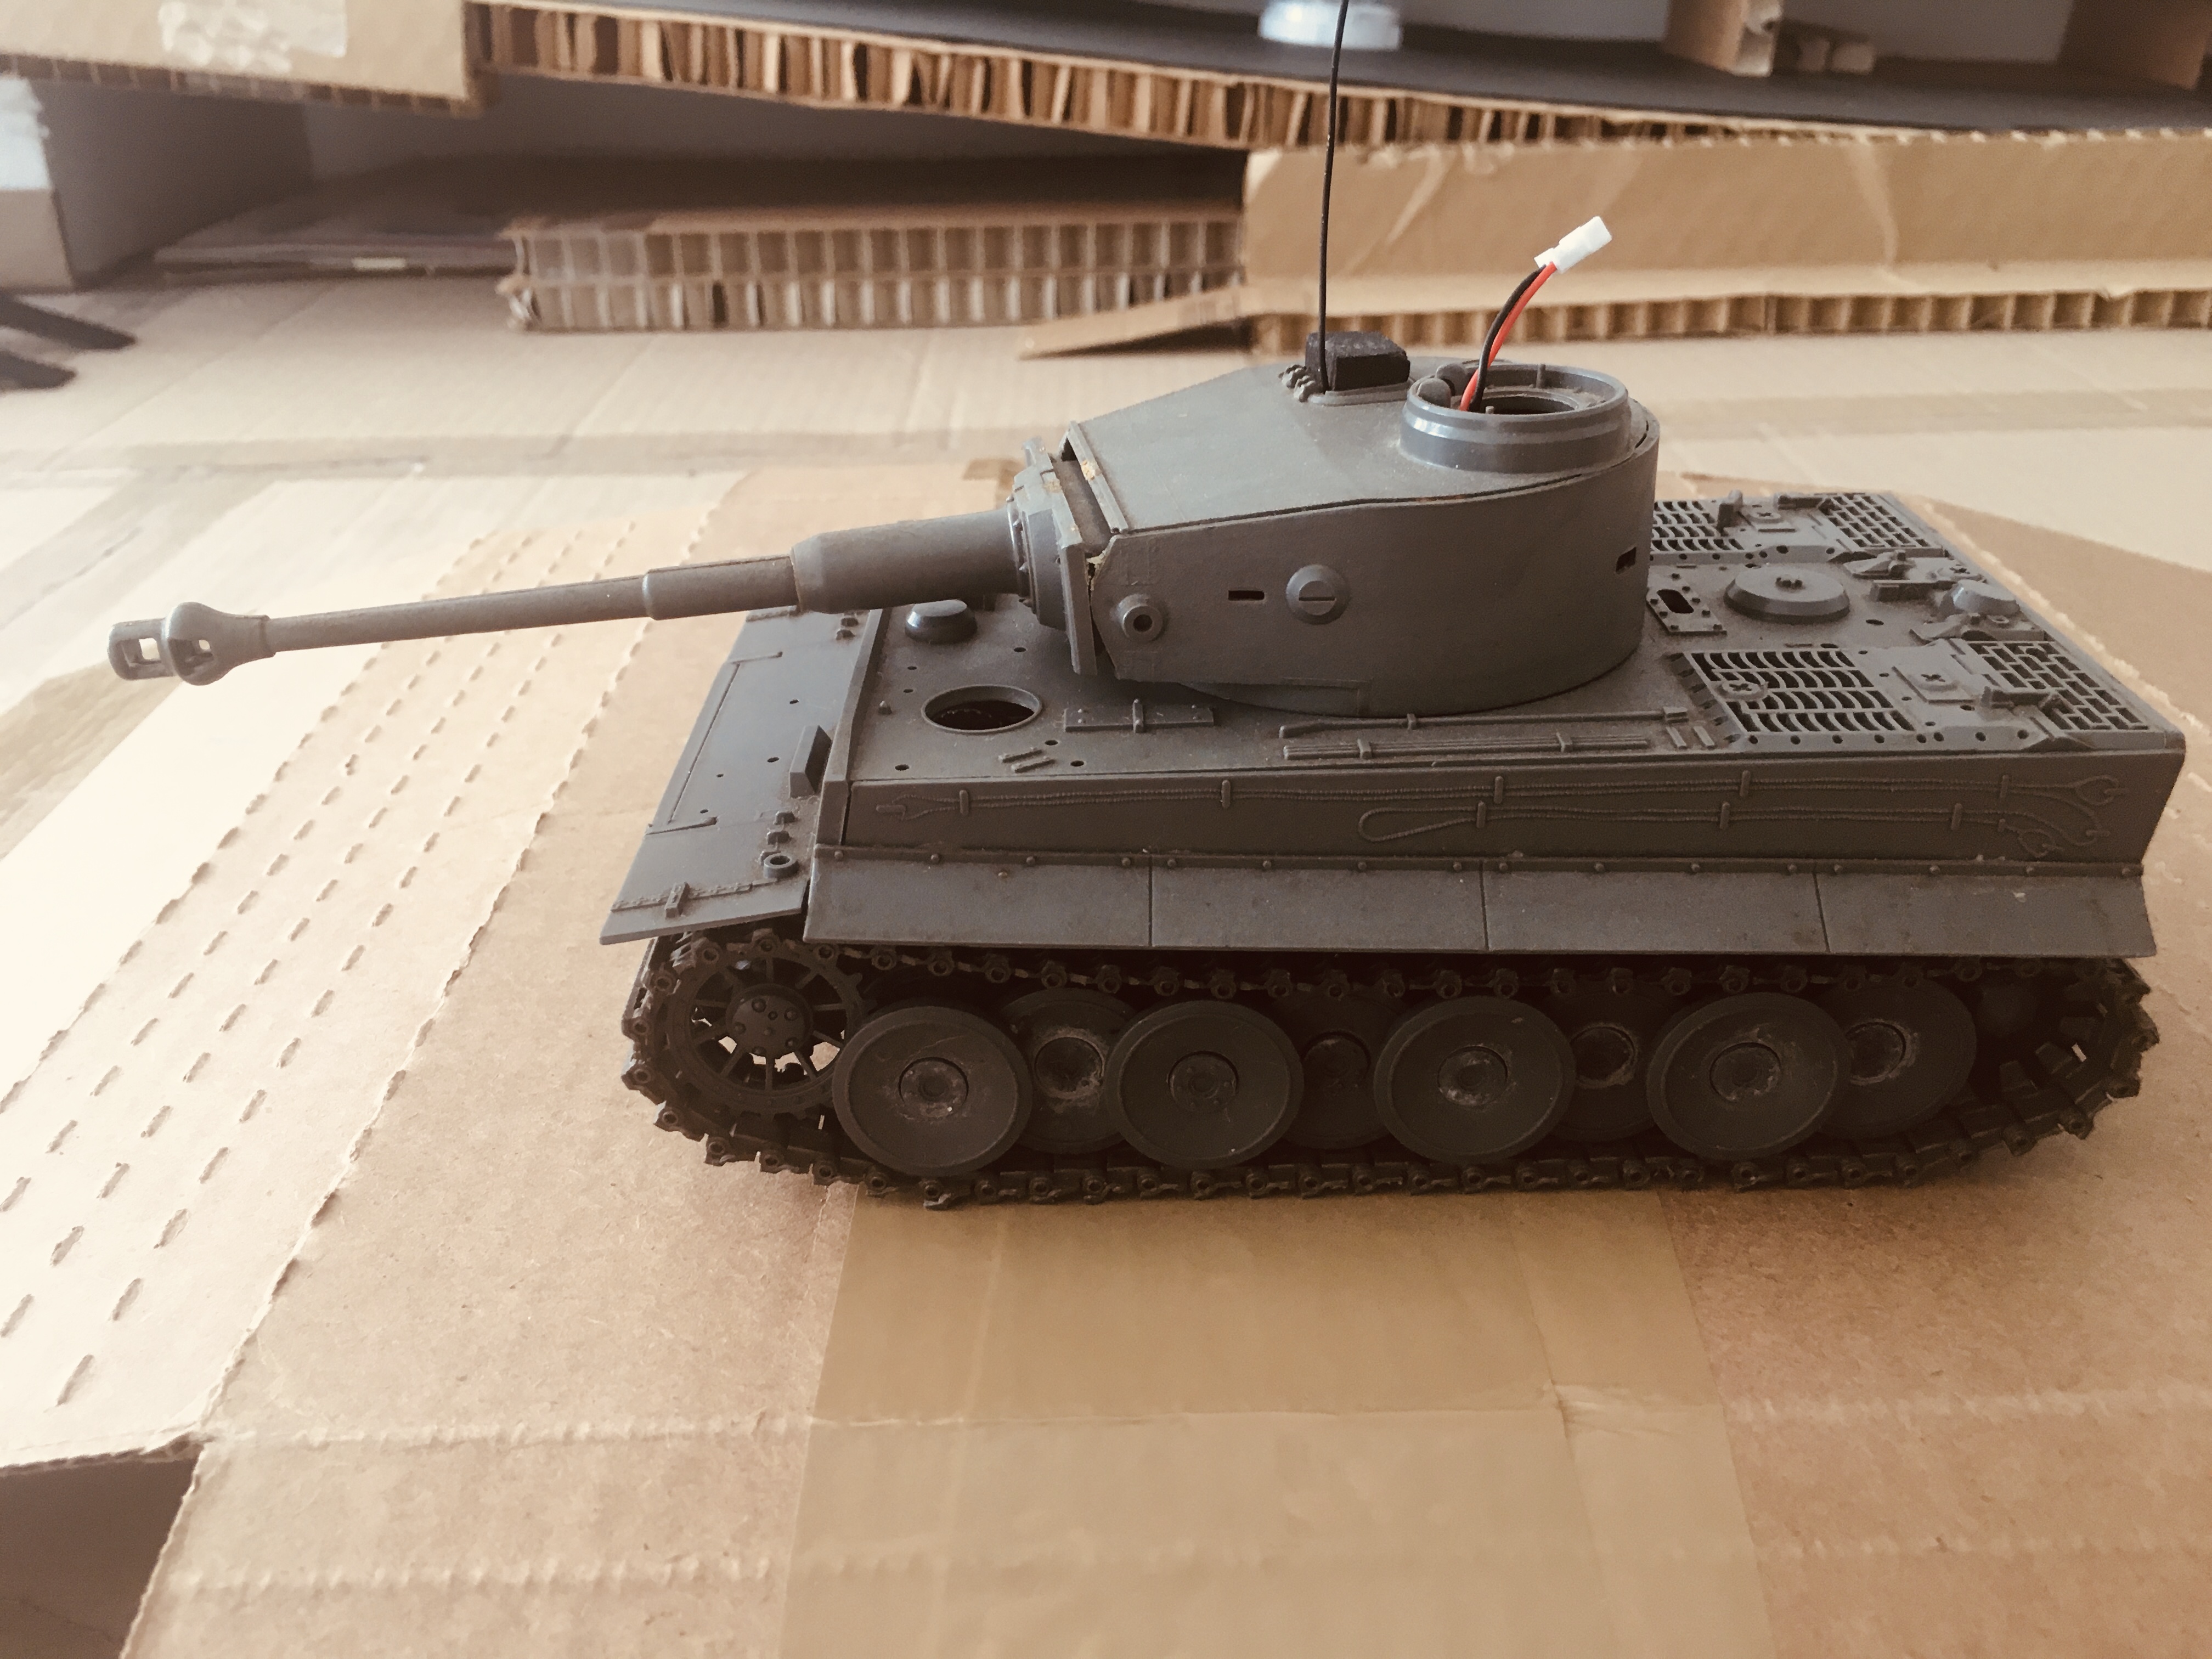 The Tracks went bad a long time ago and now have ITL tracks from a Tamiya 1/25 Centurion. I run it now and then. It grings the gears and sputters but still moves under its own power.